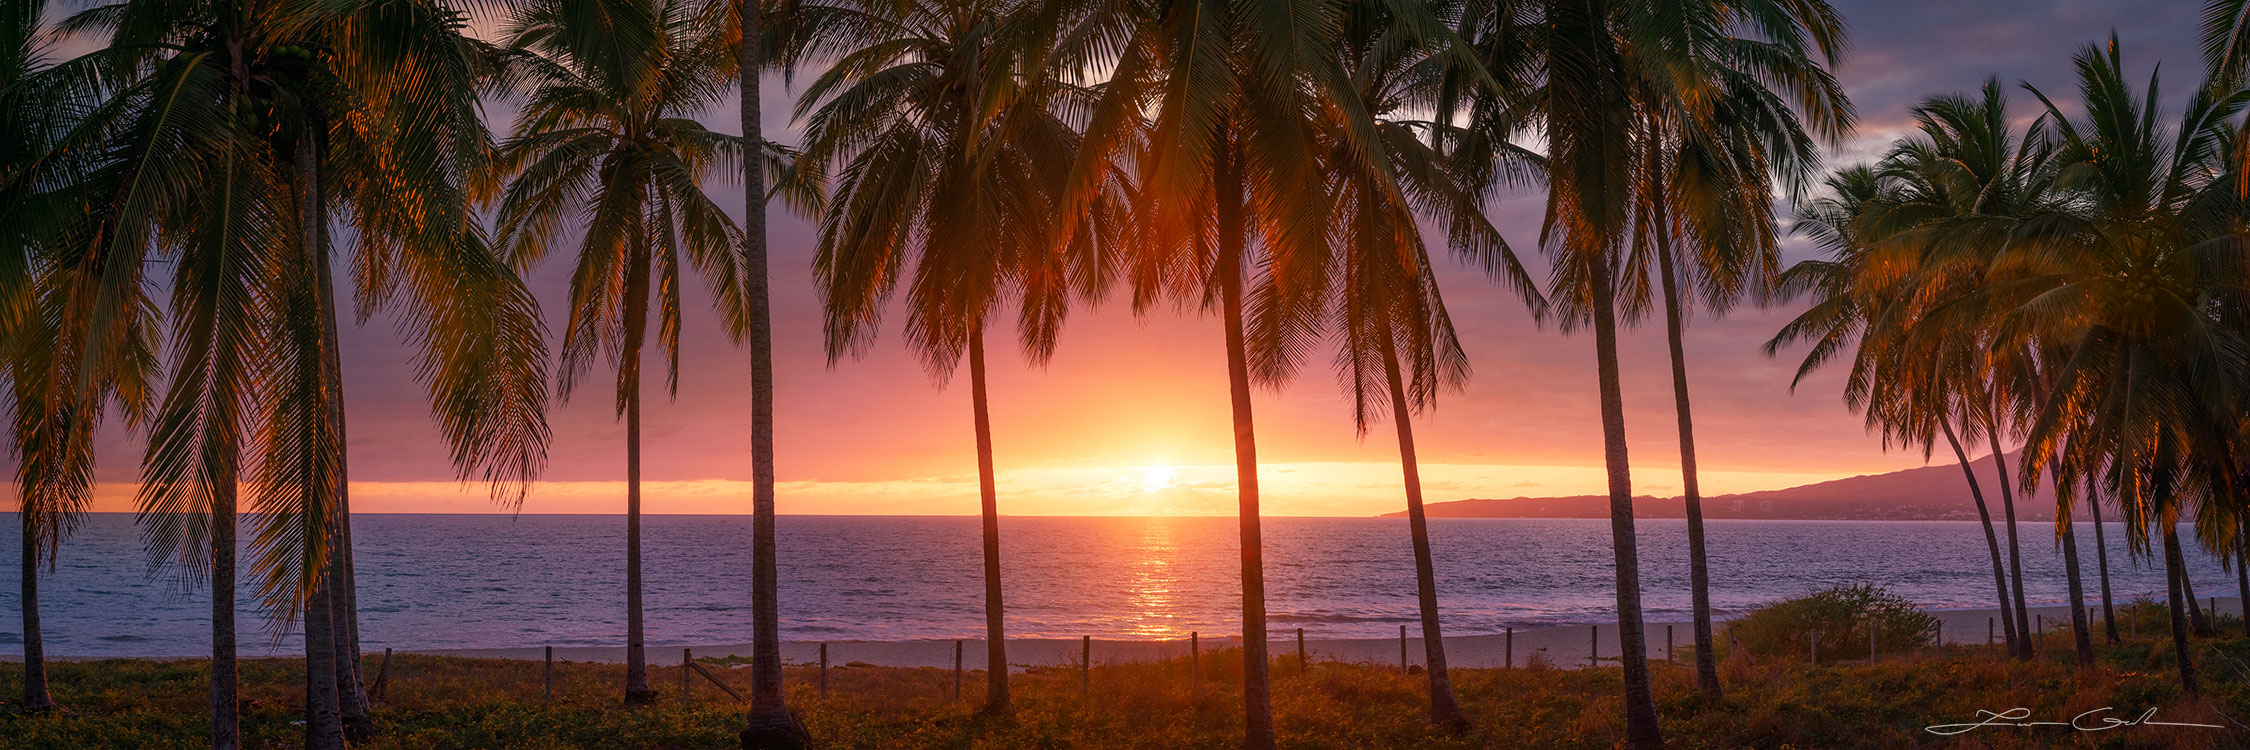 A row of palm trees on the pacific ocean in Mexico at sunset with beautiful light and clouds - Gintchin Fine Art